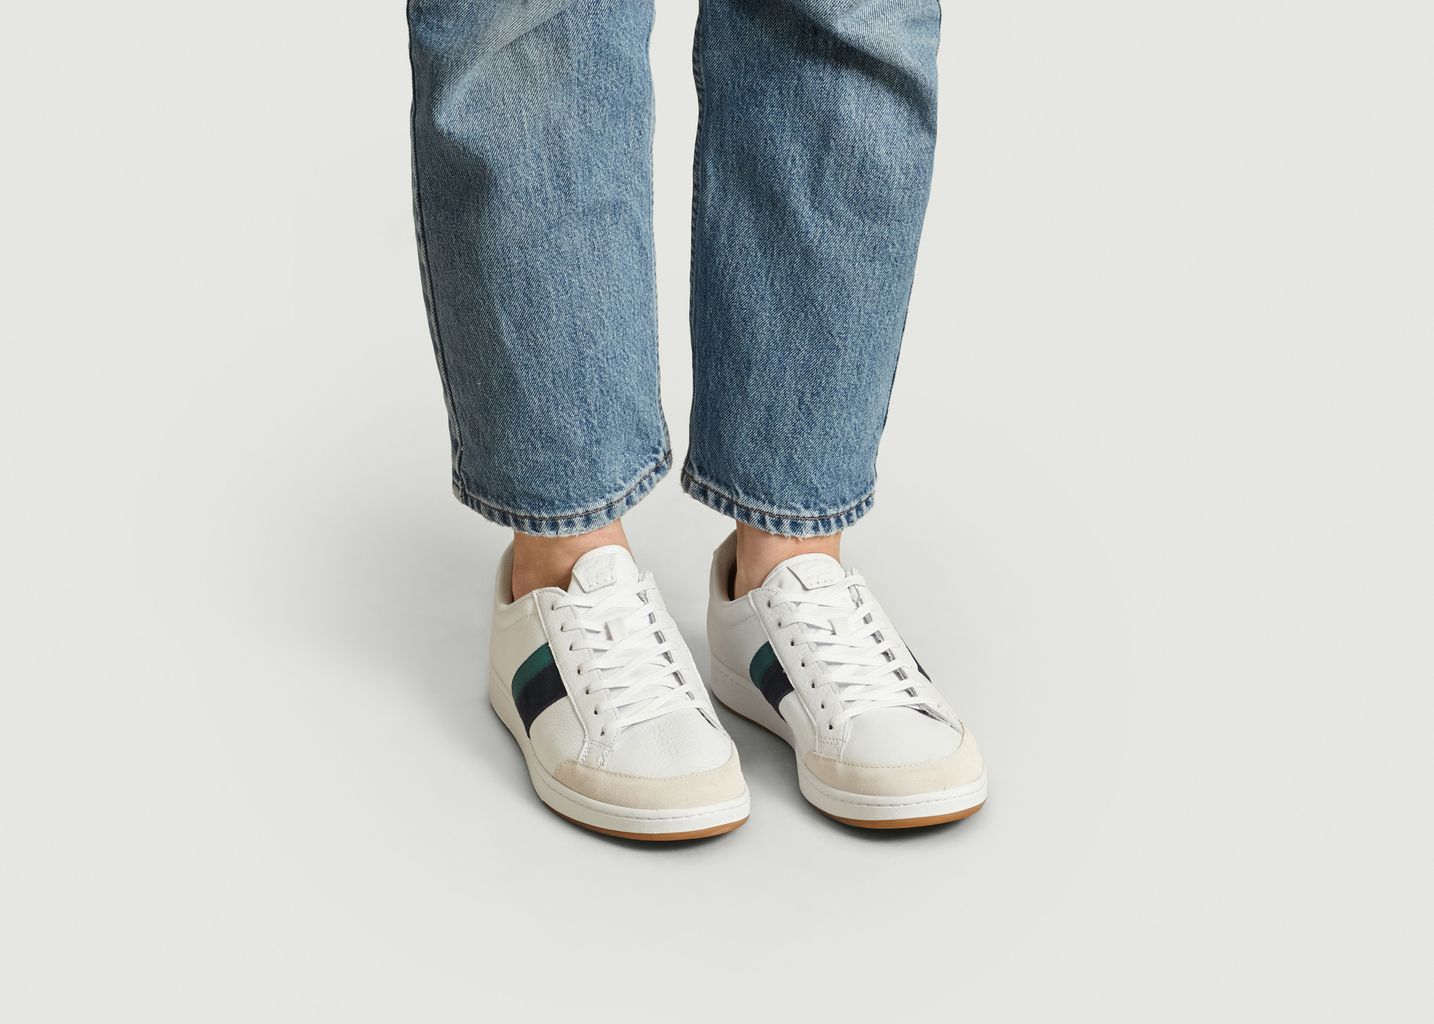 lacoste shoes with jeans